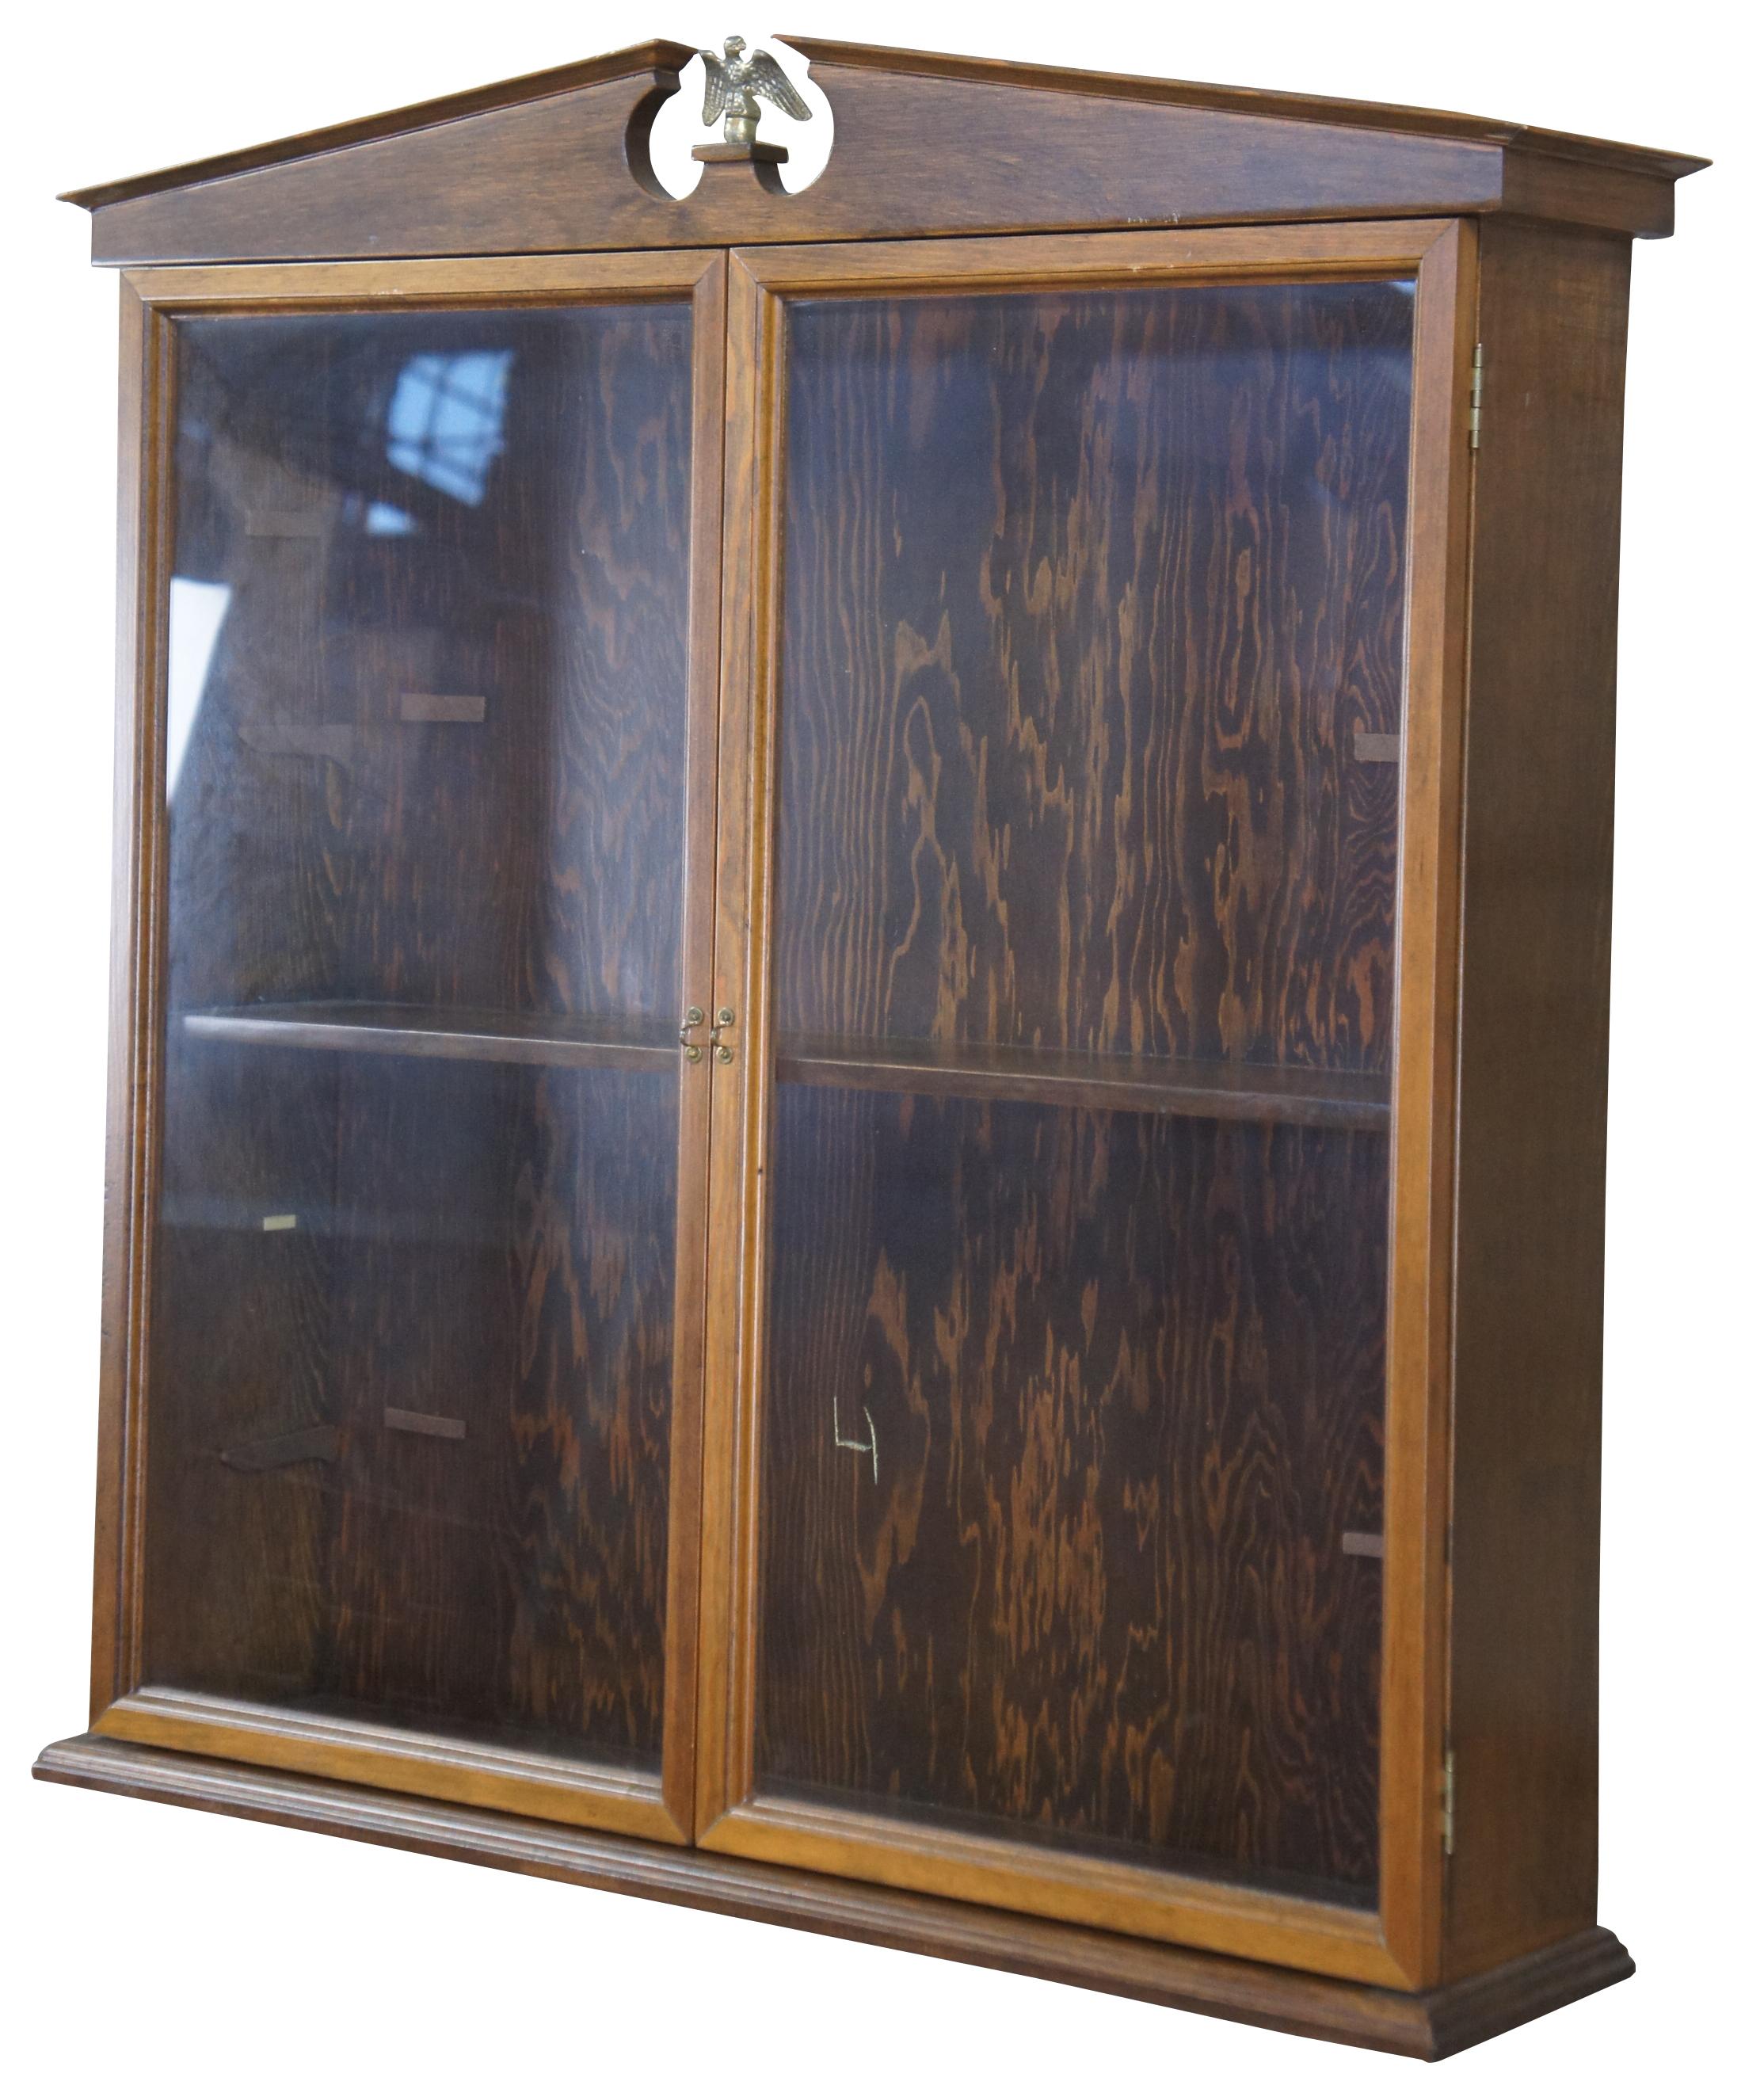 George III style wall curio or display cabinet, circa mid 20th century. Made of walnut featuring a broken pediment top, interior shelves with optional inserts, and glass doors locked by fish clasp. Two available. One has brass American Eagle finial,